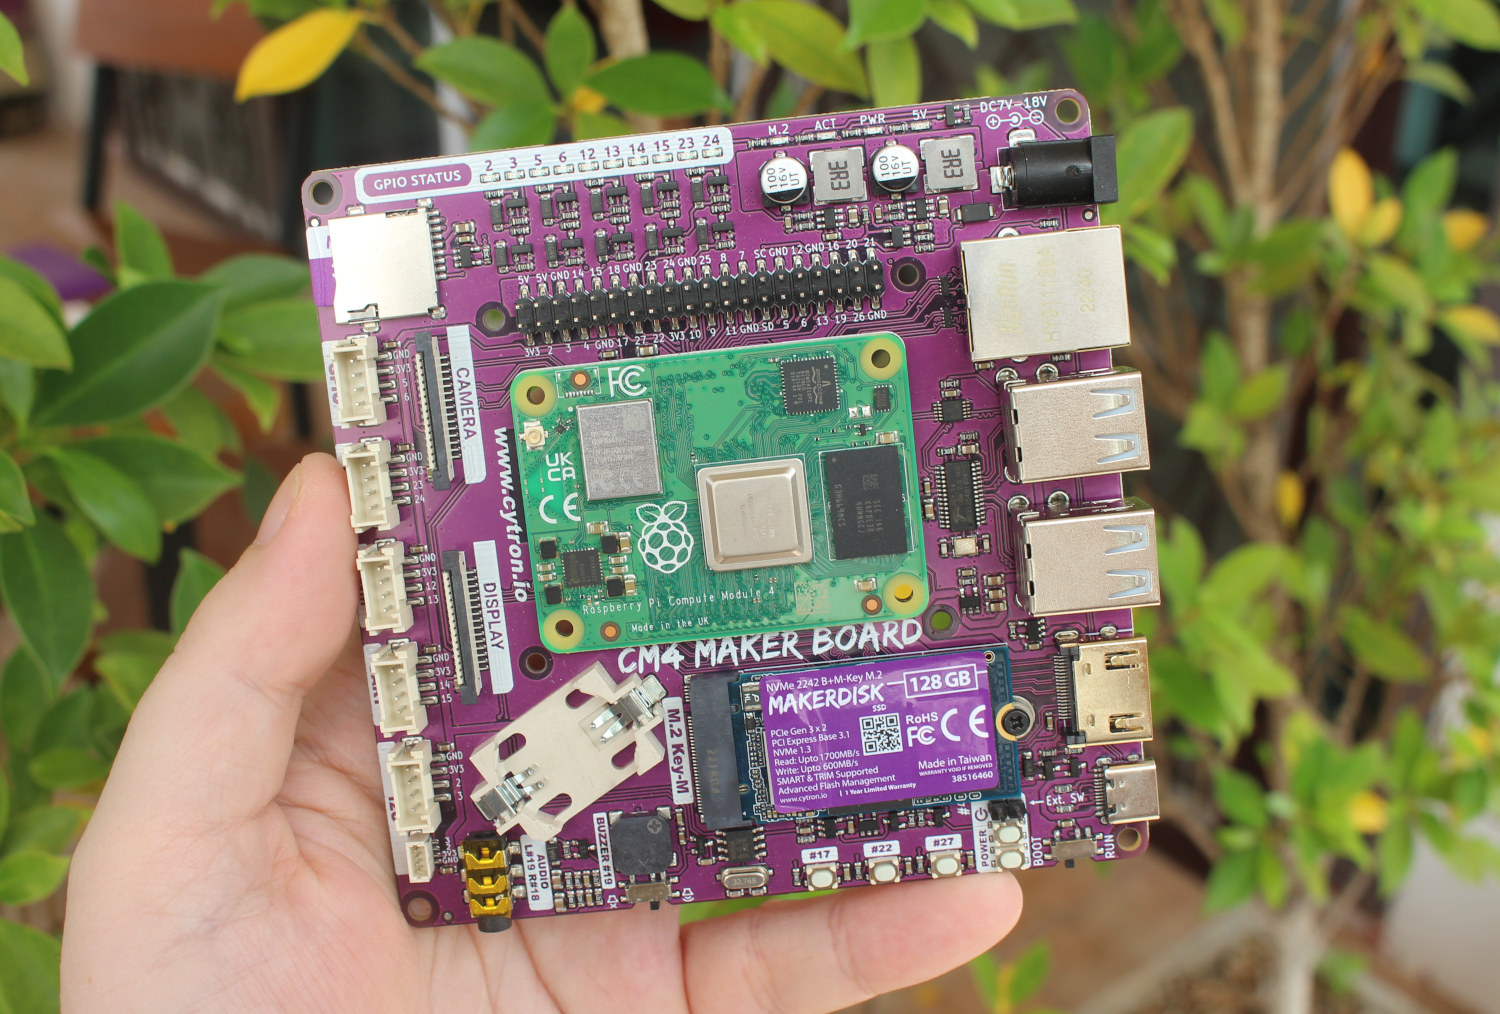 CM4 Maker Board review - Part 1: specifications, unboxing, and